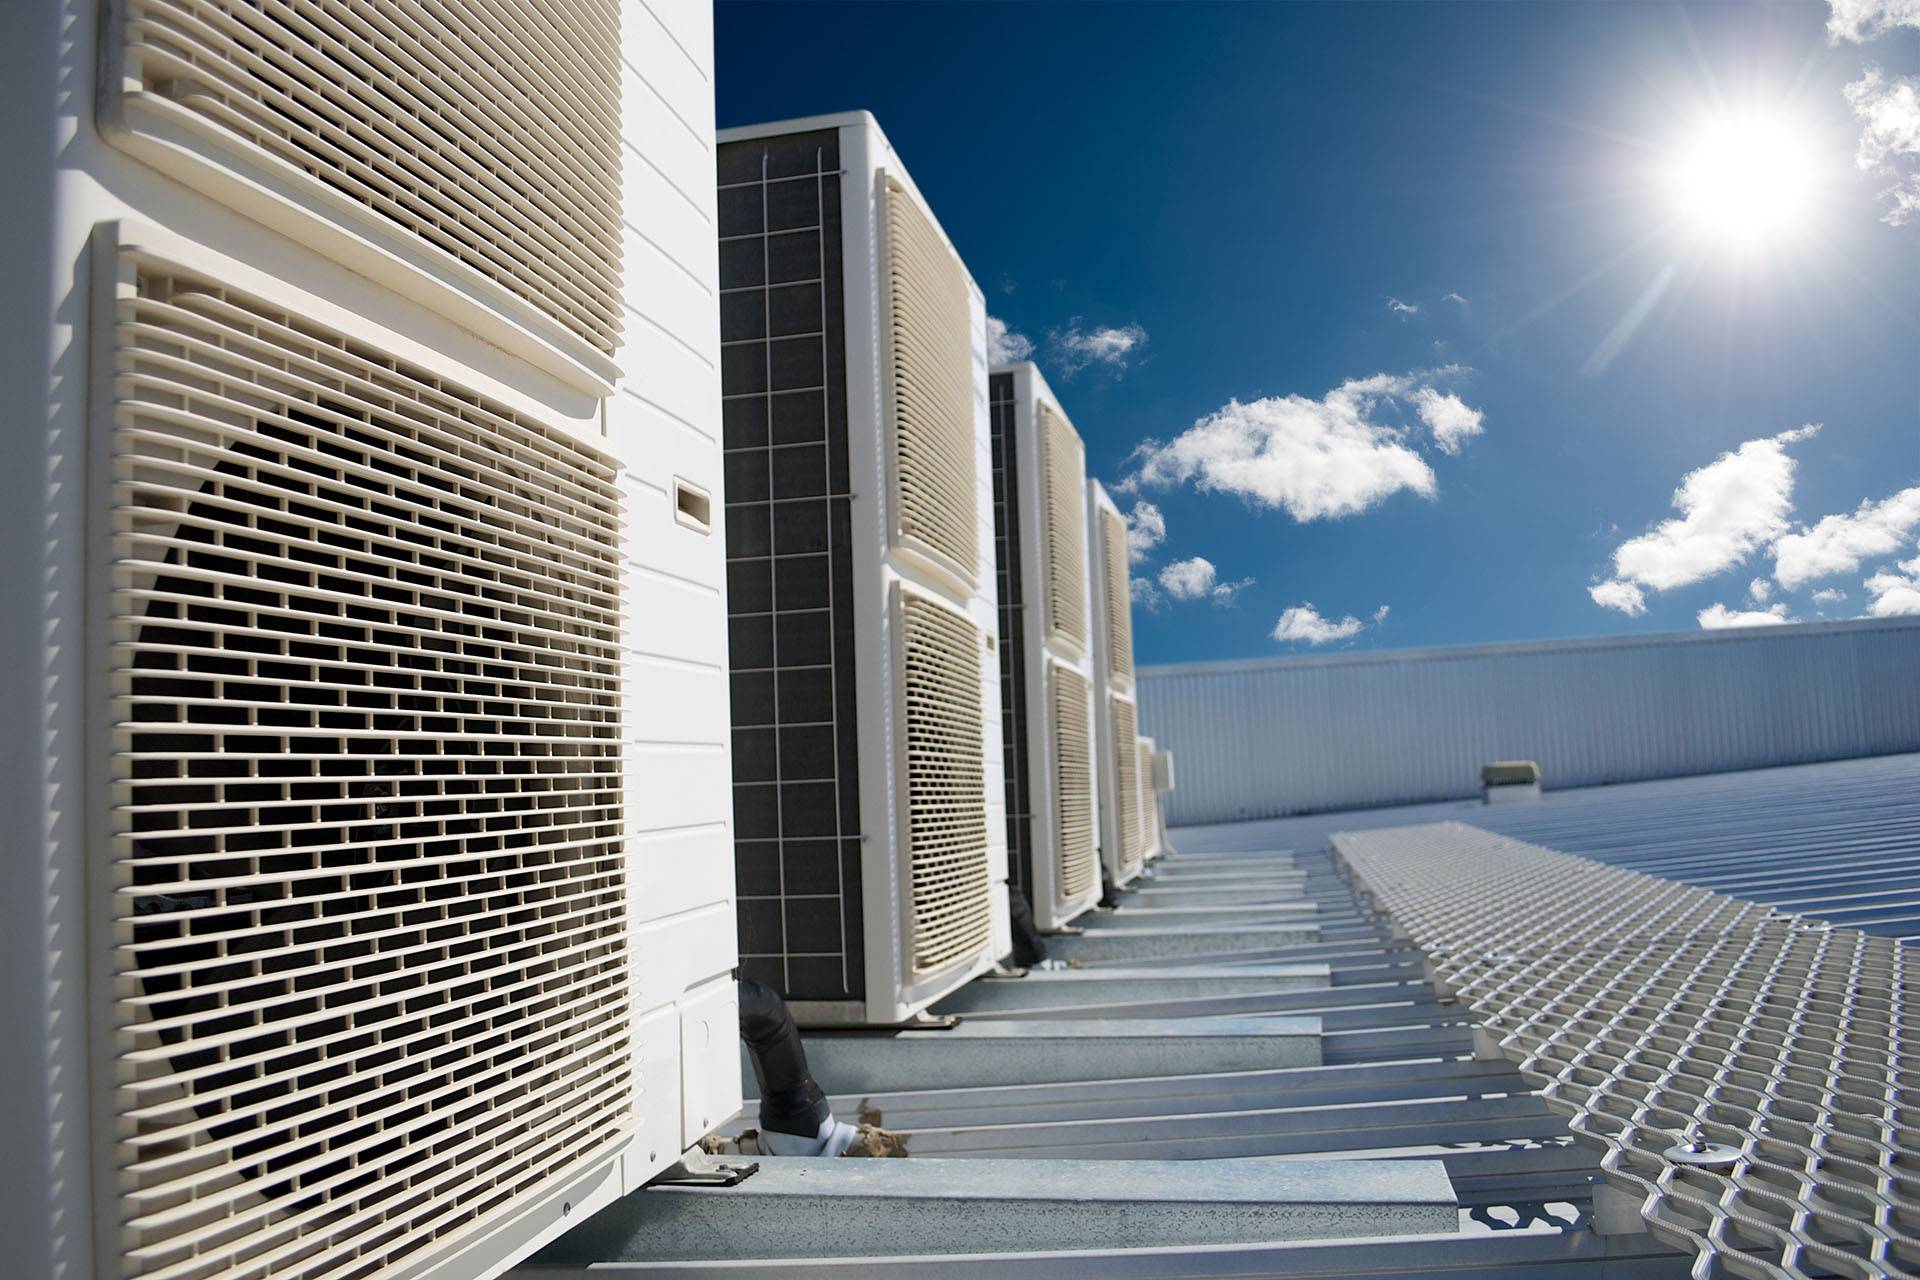 Air conditioner units on a roof of industrial building with blue sky and clouds in the background.